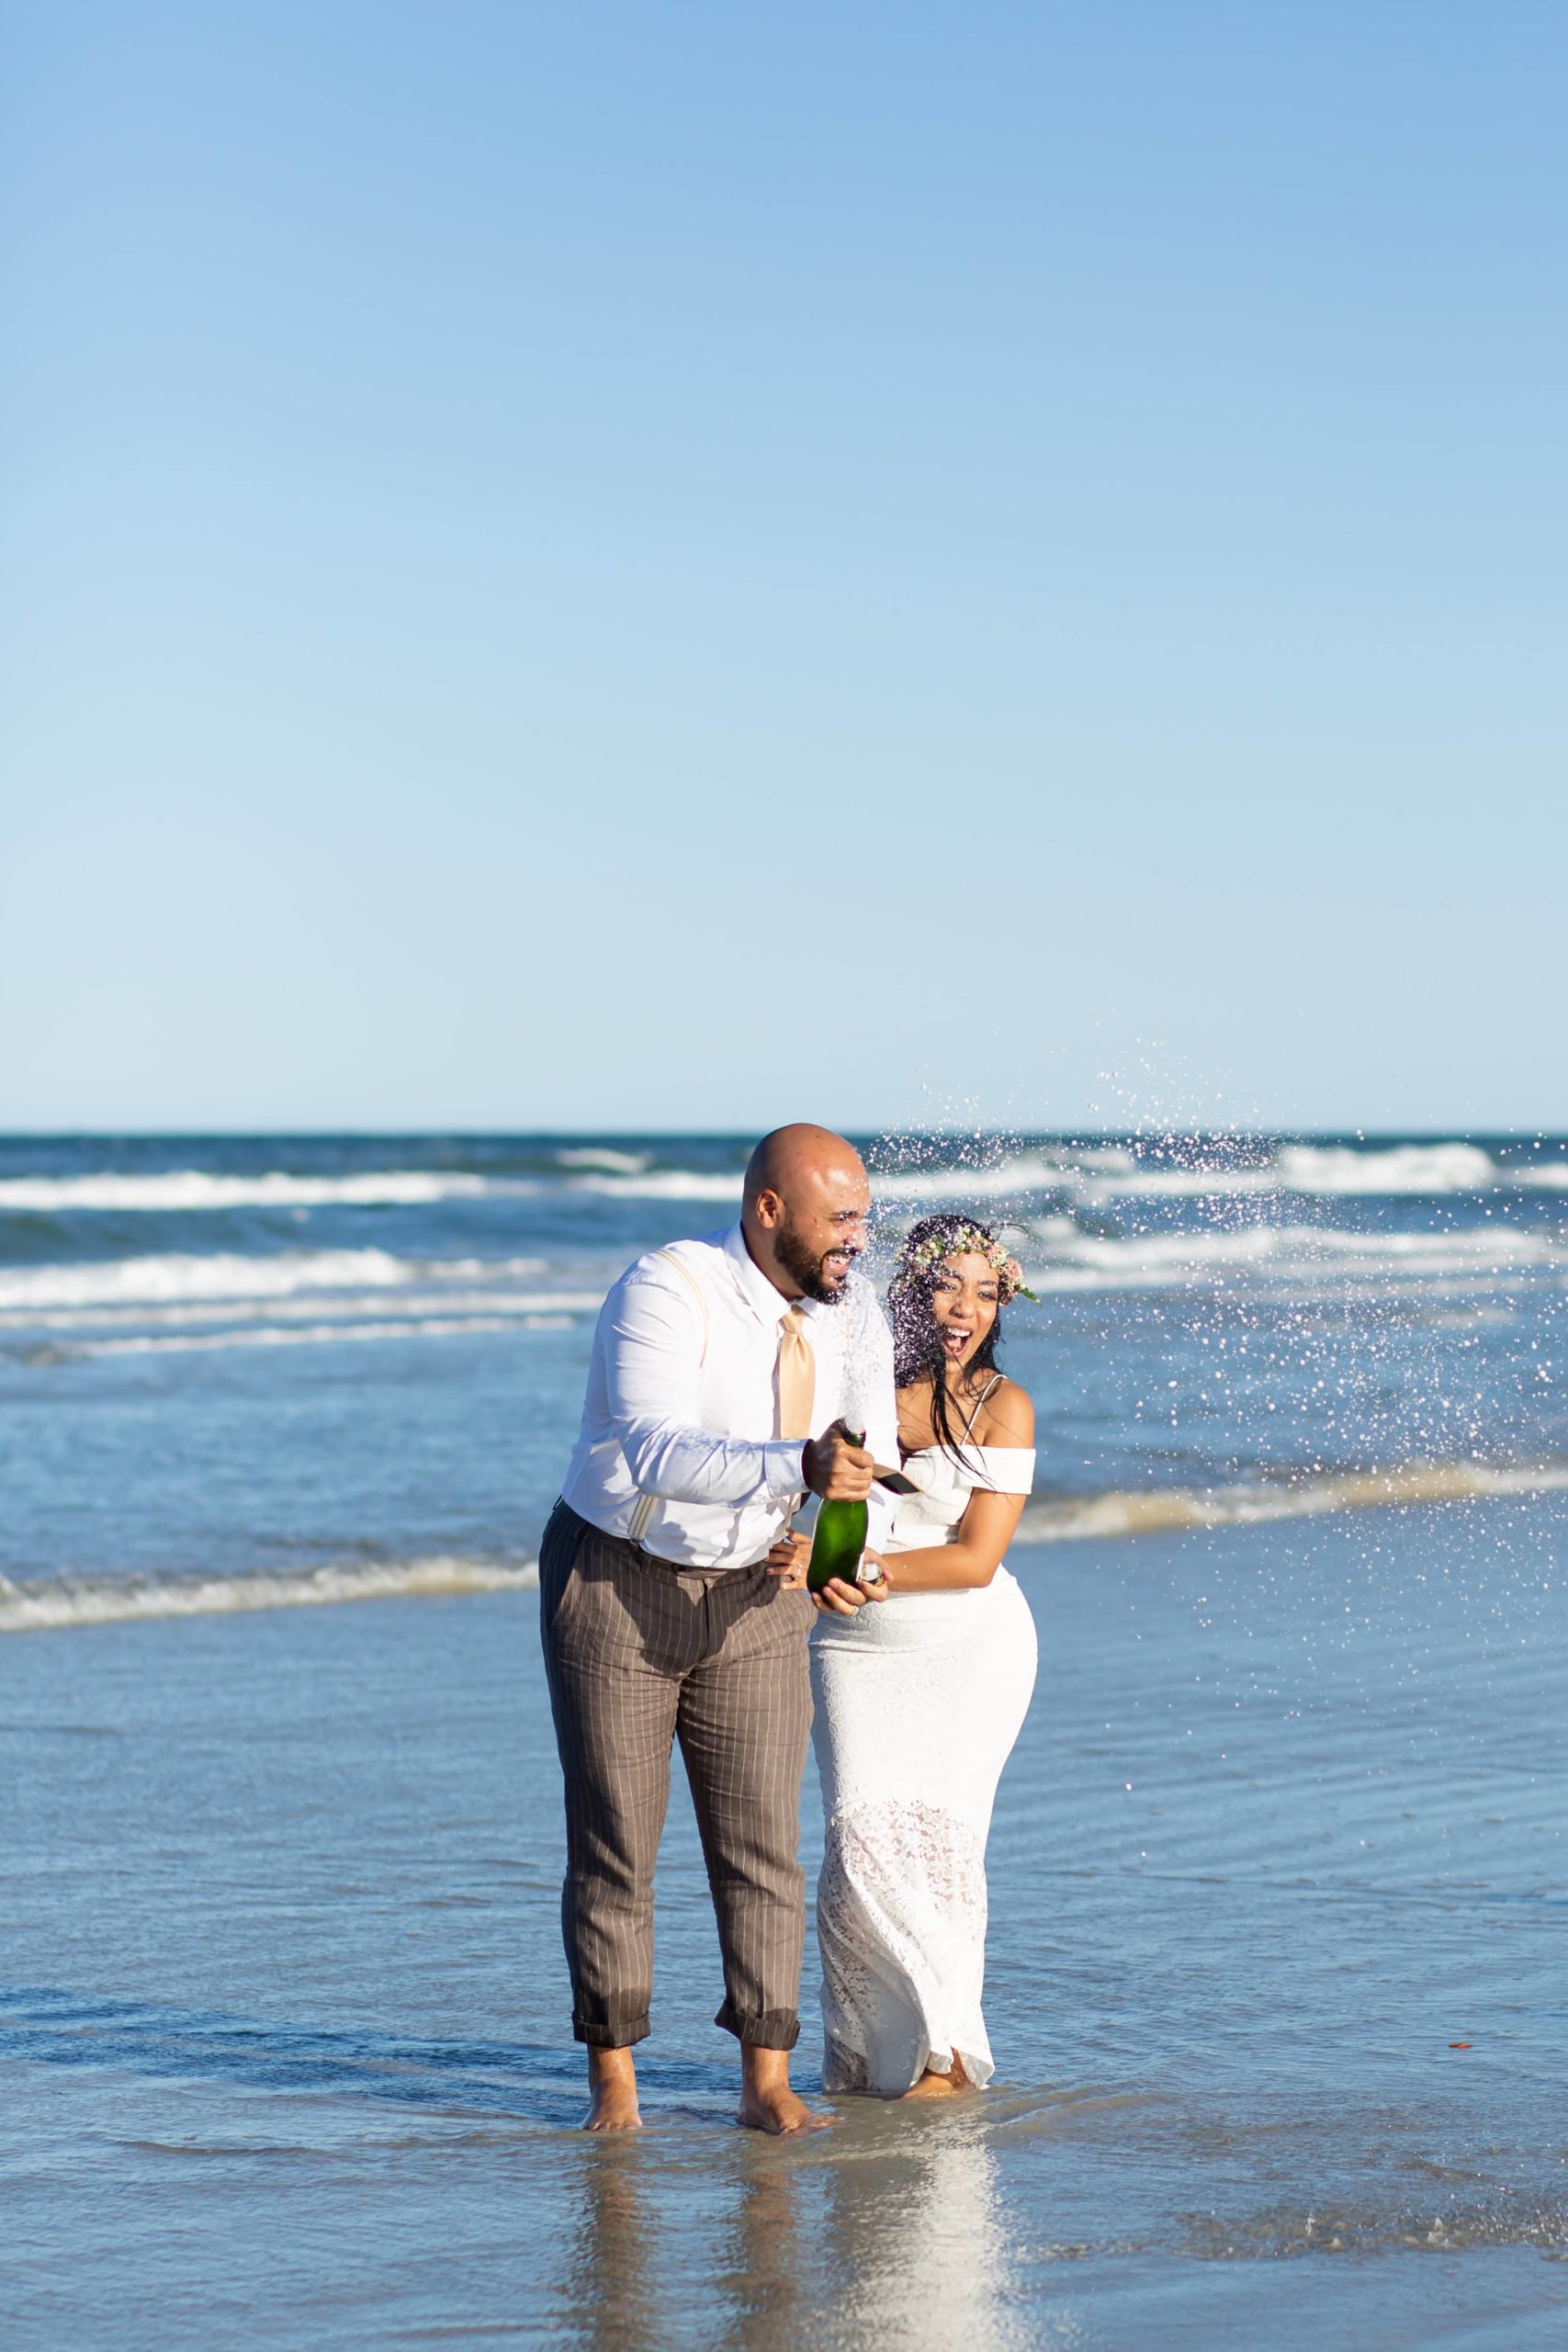 Bride & Groom doing a champagne pop in the ocean to celebrate elopement